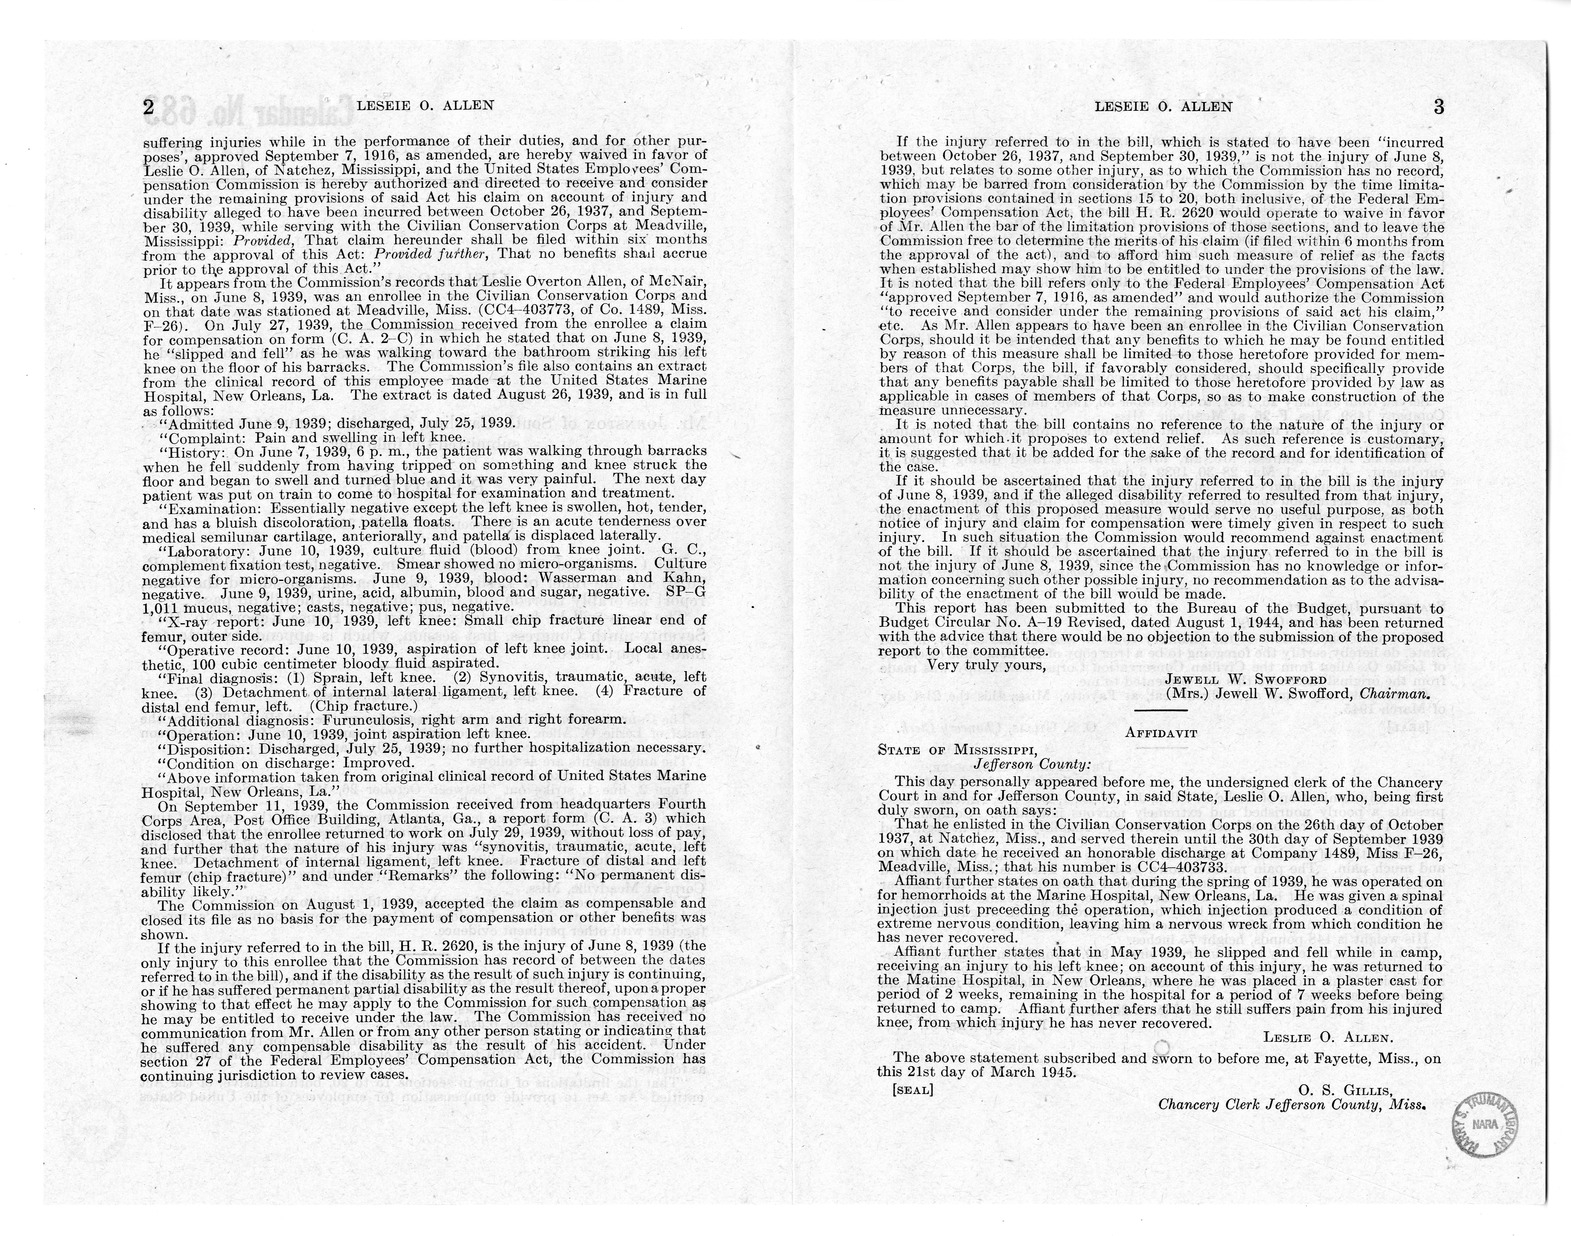 Memorandum from Frederick J. Bailey to M. C. Latta, H.R. 2620, For the Relief of Leslie O. Allen, with Attachments